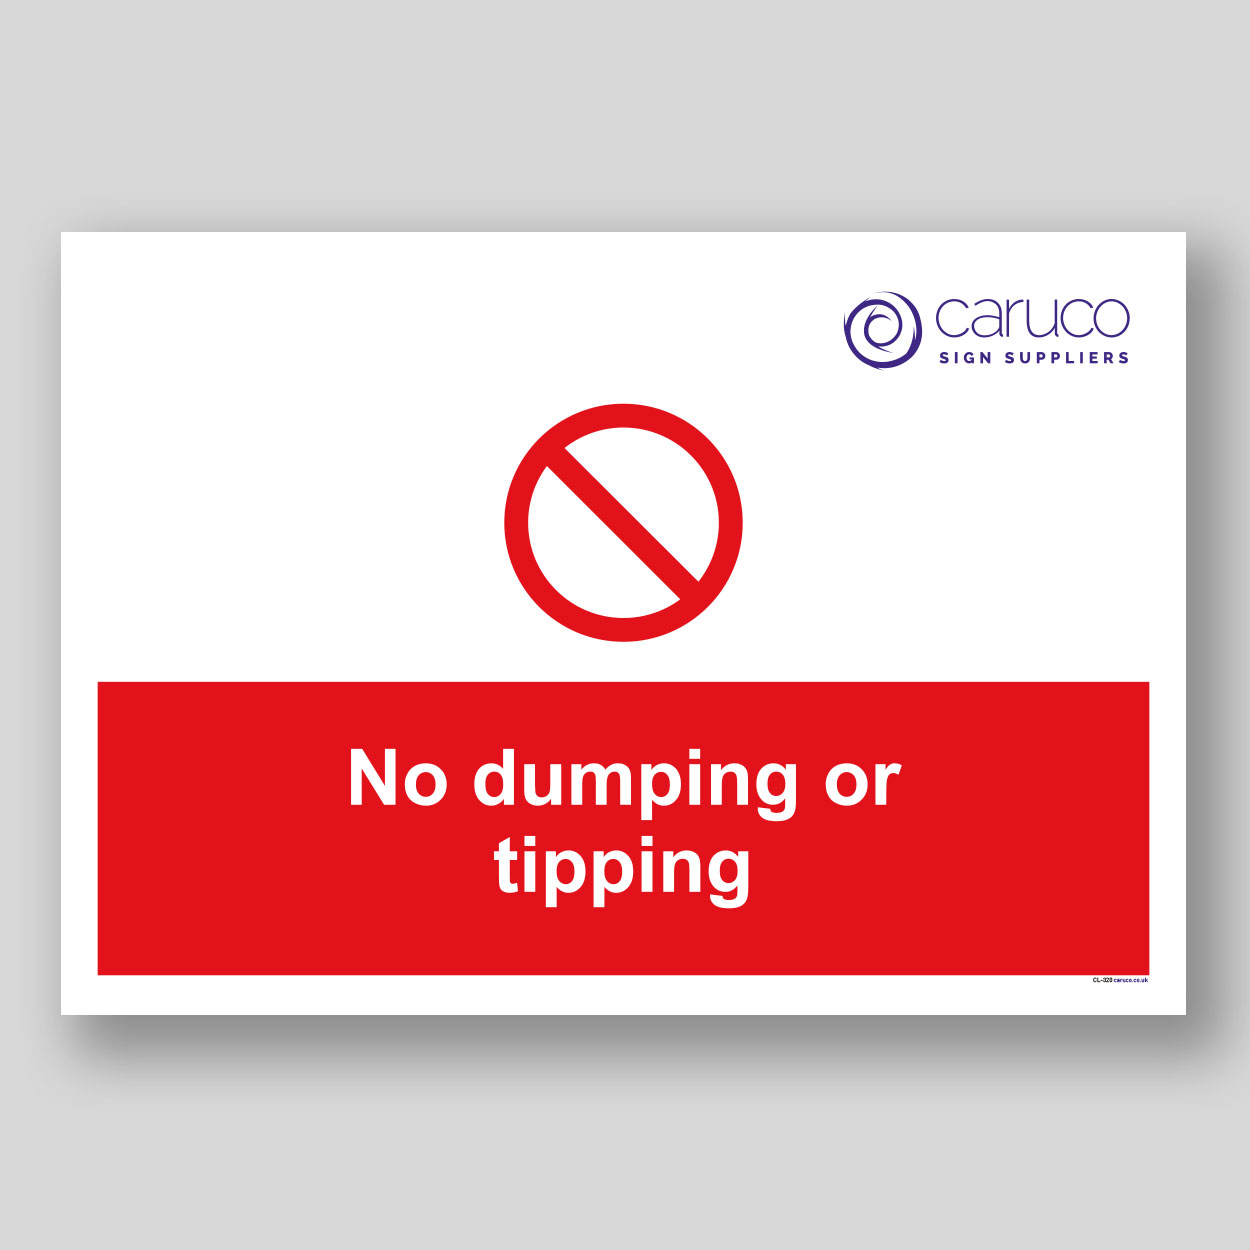 CL-320 No dumping or tipping